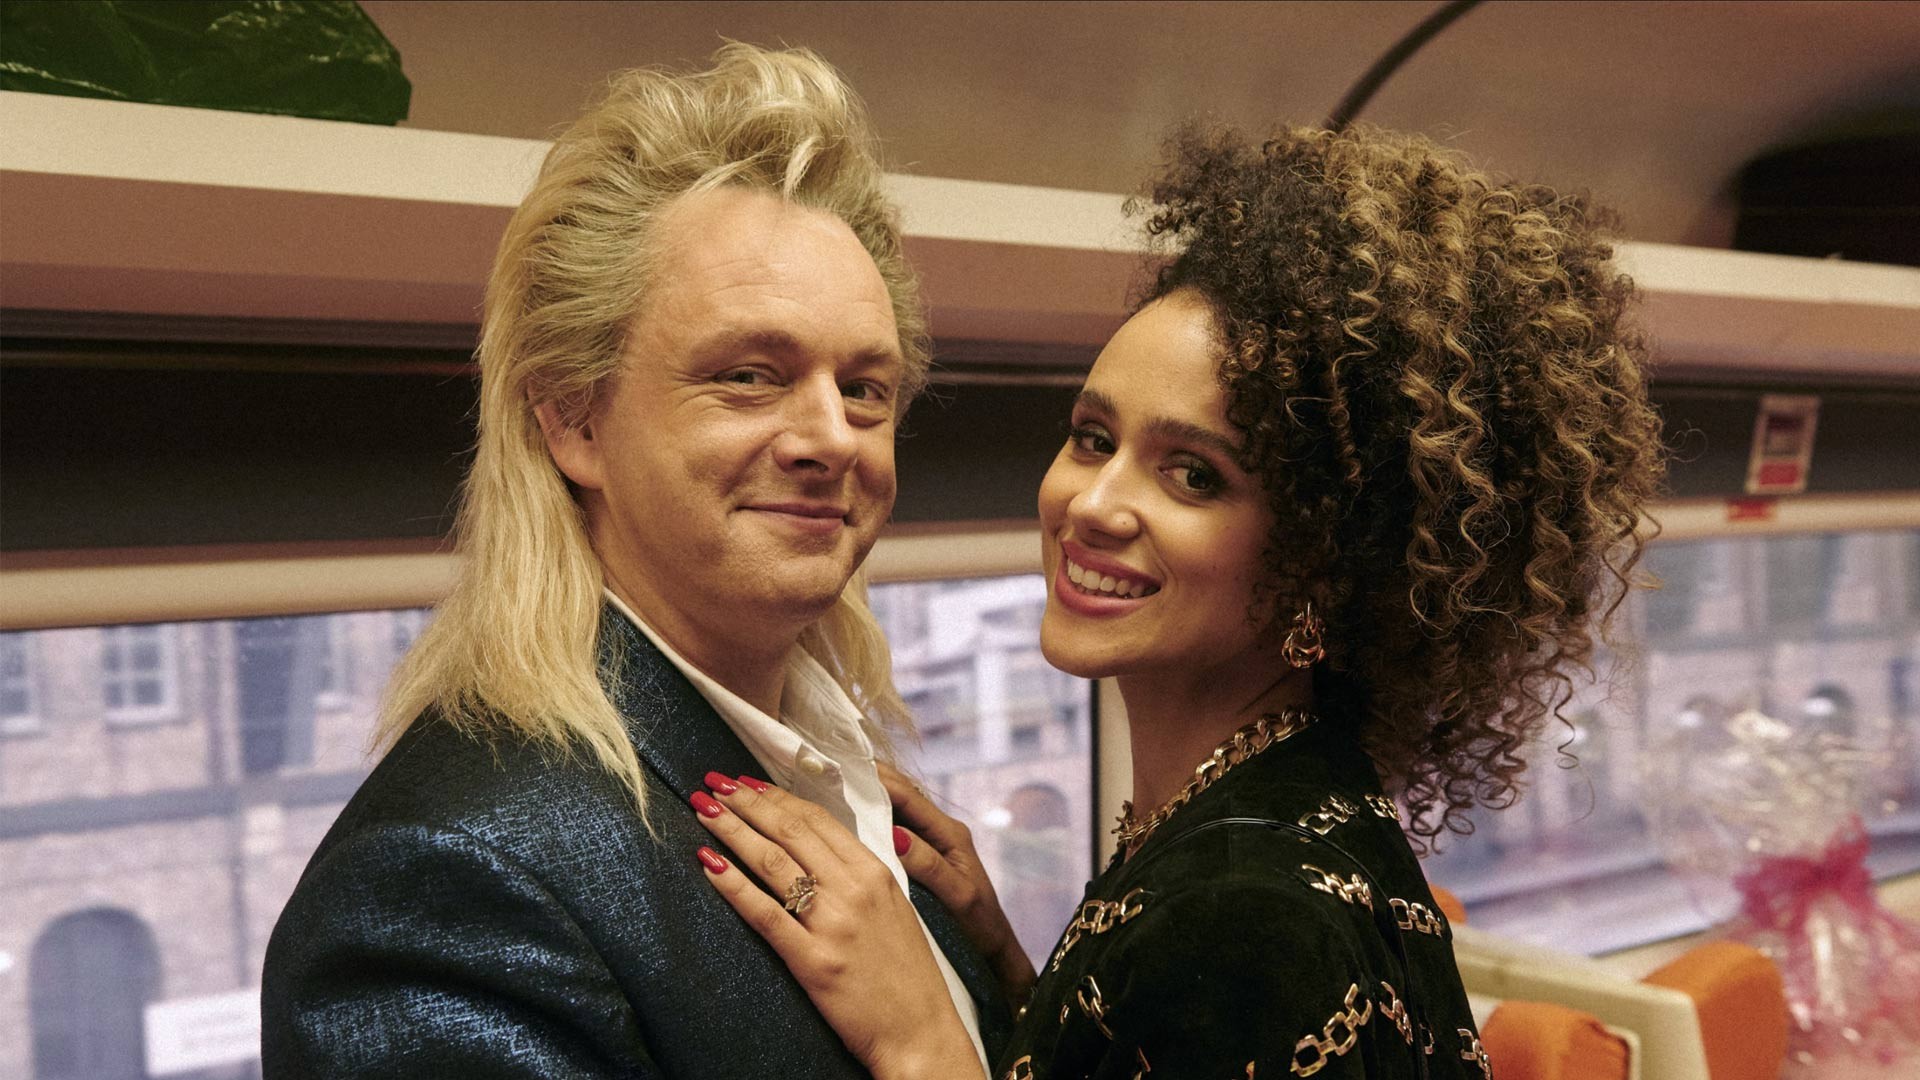 Casting News: Michael Sheen and Nathalie Emmanuel to Star in Time-Traveling Movie 'Last Train to Christmas'